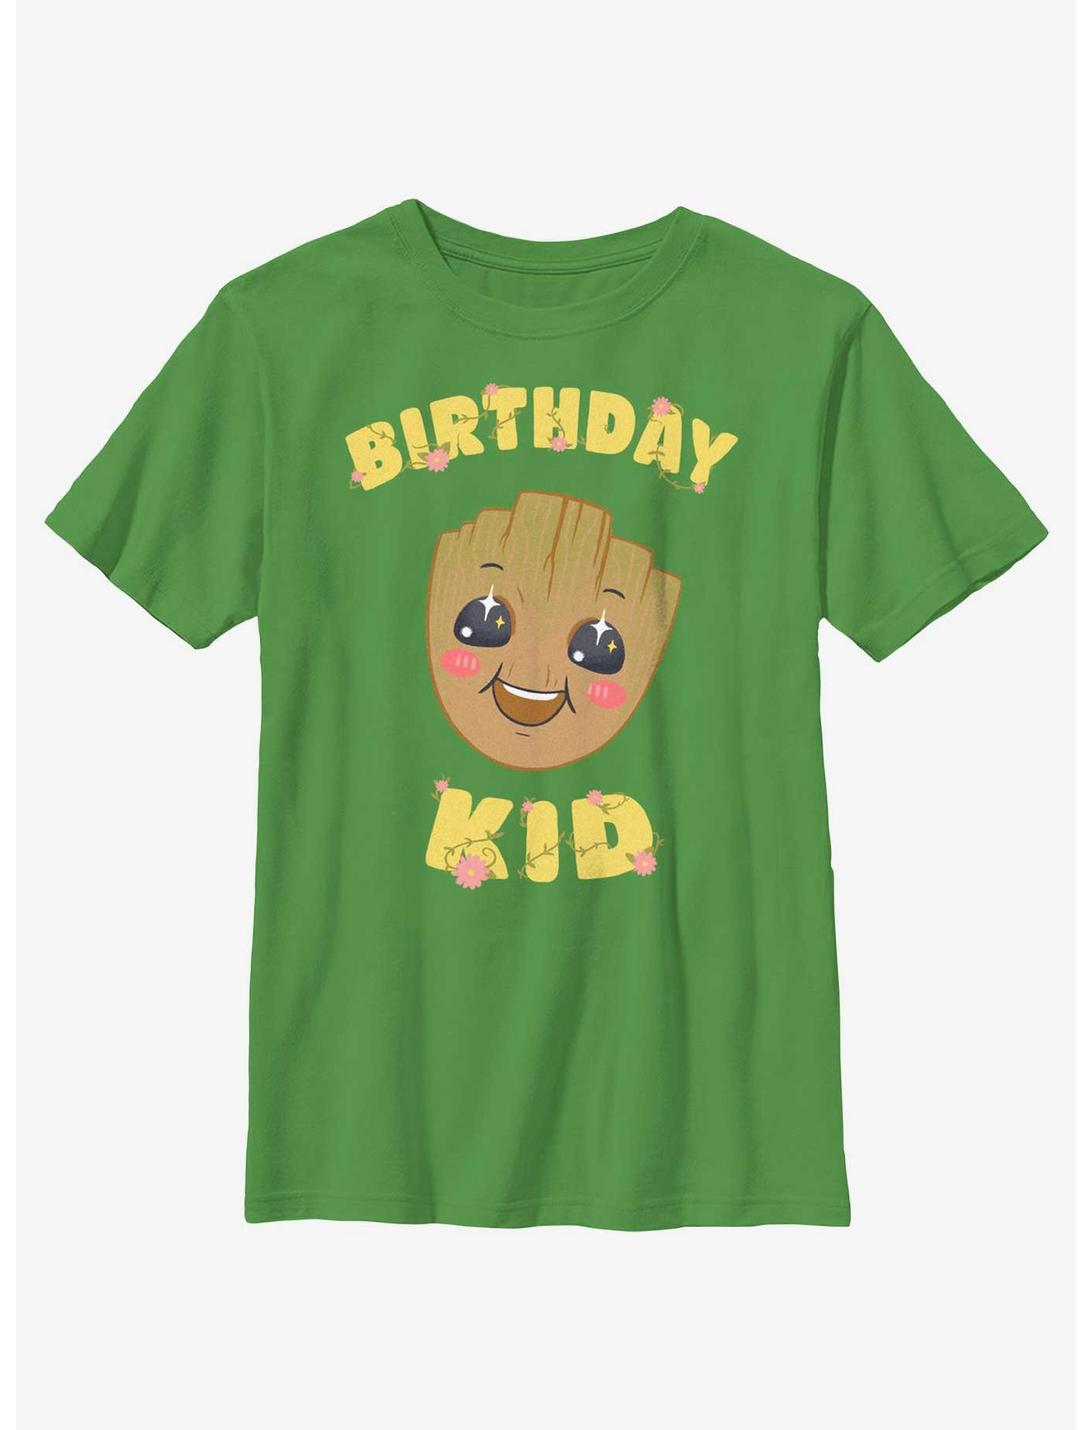 Marvel Guardians Of The Galaxy Birthday Kid Groot Youth T-Shirt, KELLY, hi-res